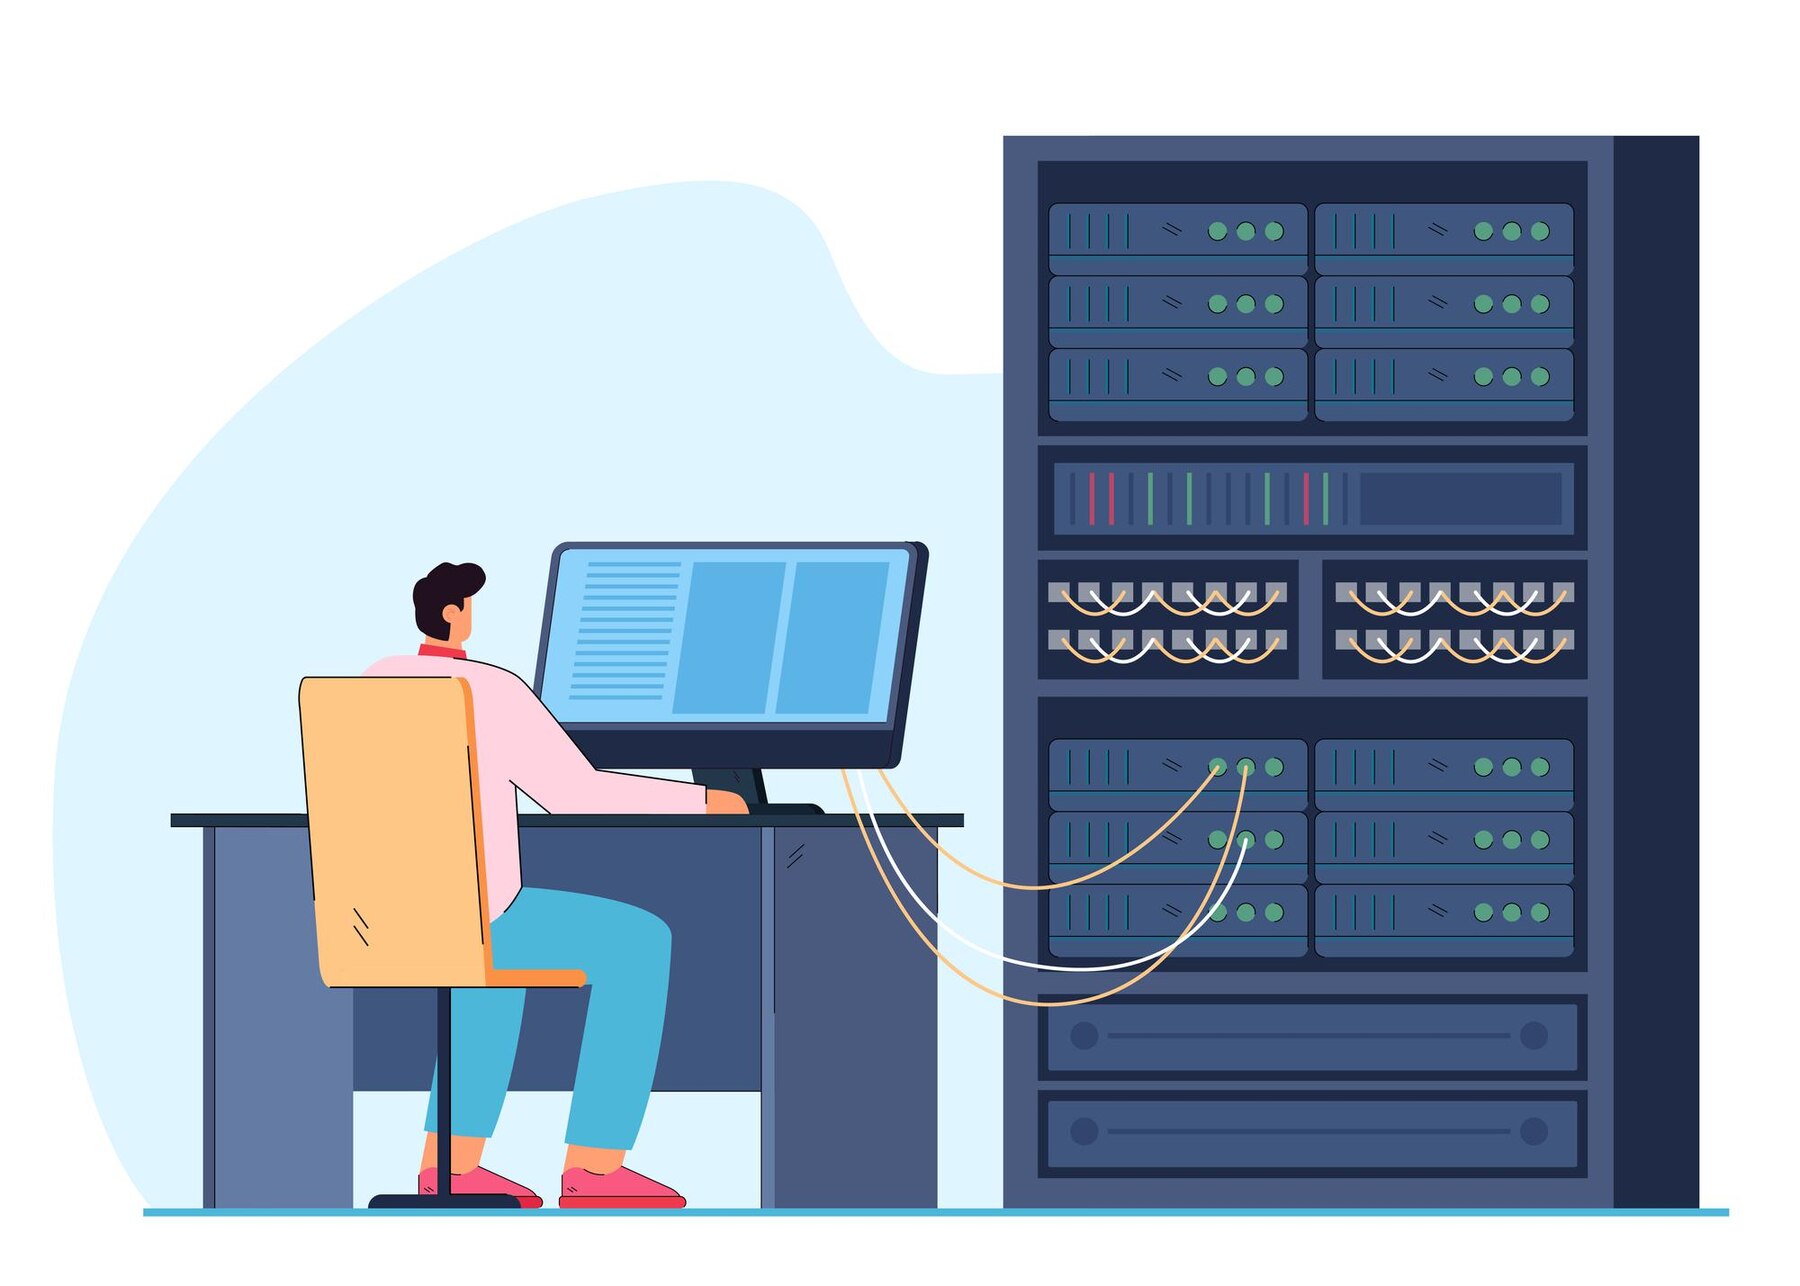 man engineer working computer server rack switchboard guy switching panel cabinet with plugged ethernet optical cables telecommunications engineering concept flat illustration 74855 20639